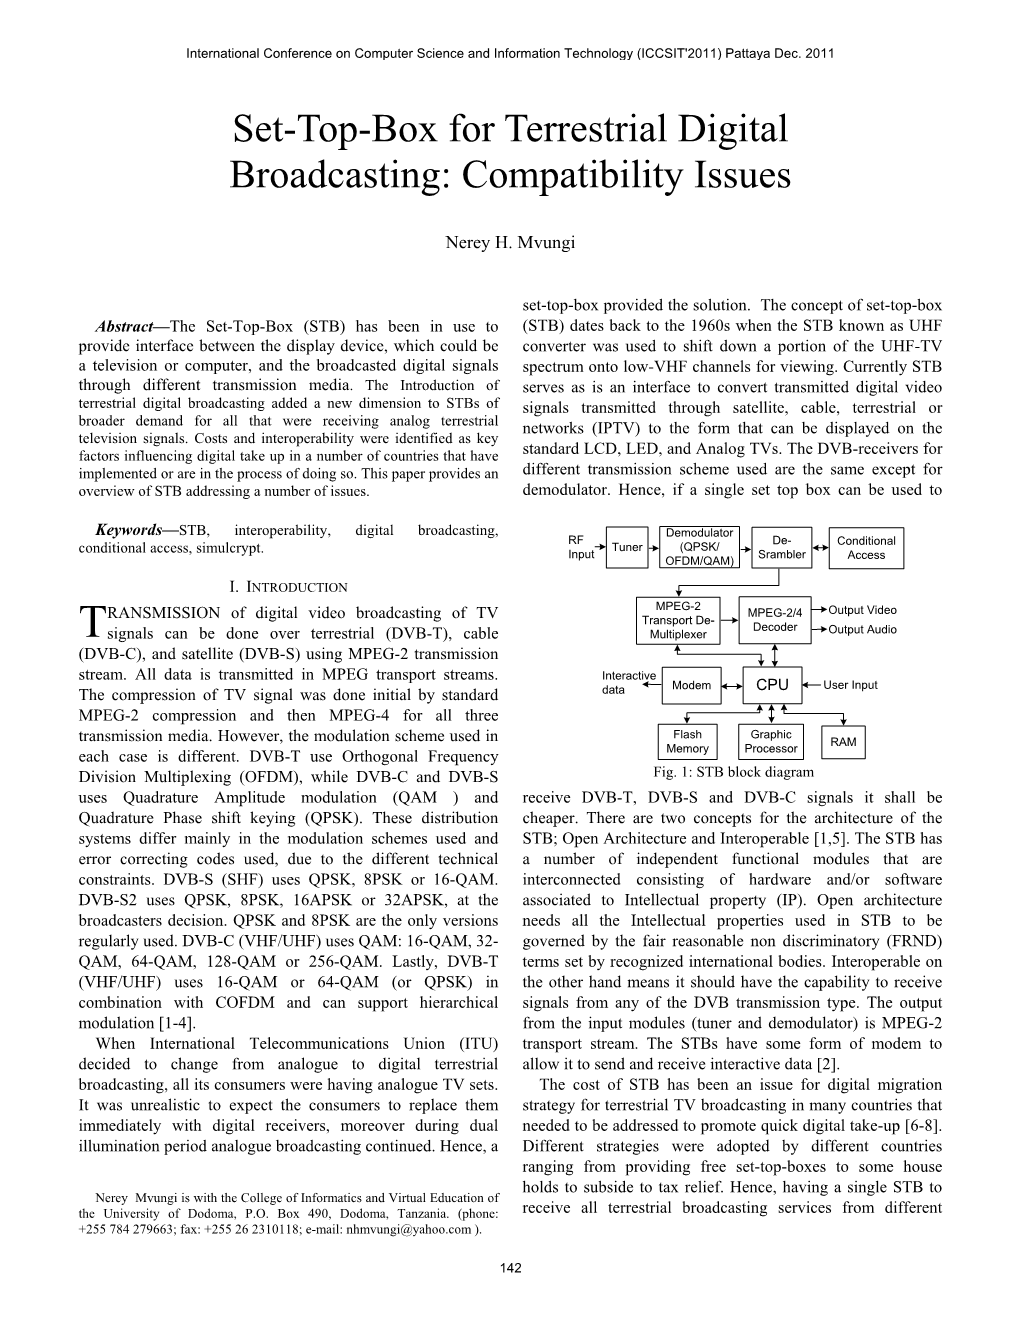 Set-Top-Box for Terrestrial Digital Broadcasting: Compatibility Issues